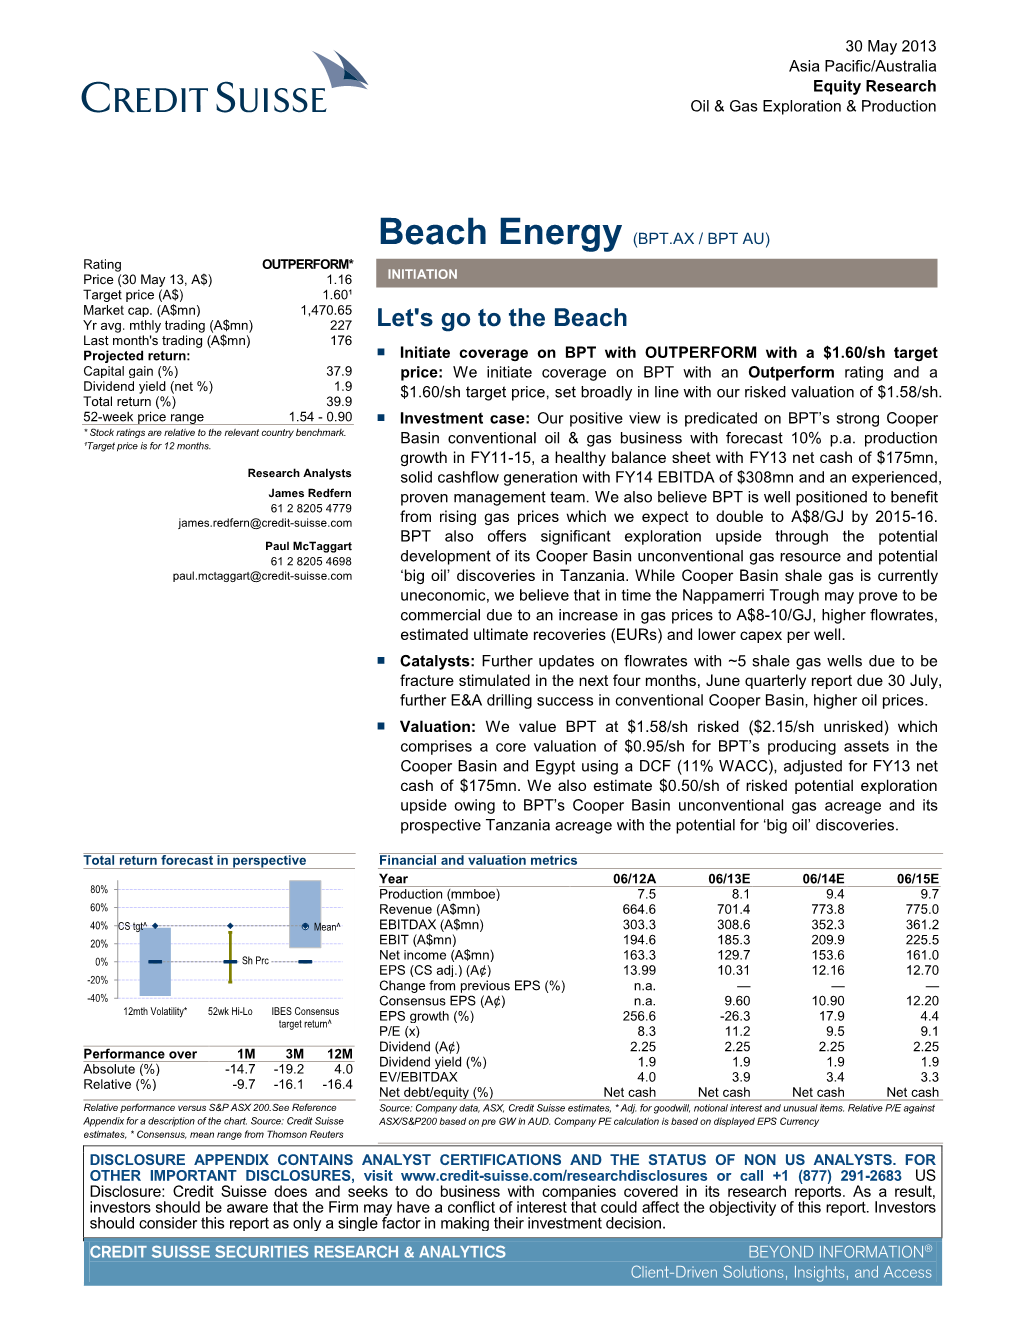 Beach Energy (BPT.AX / BPT AU) Rating OUTPERFORM* Price (30 May 13, A$) 1.16 INITIATION